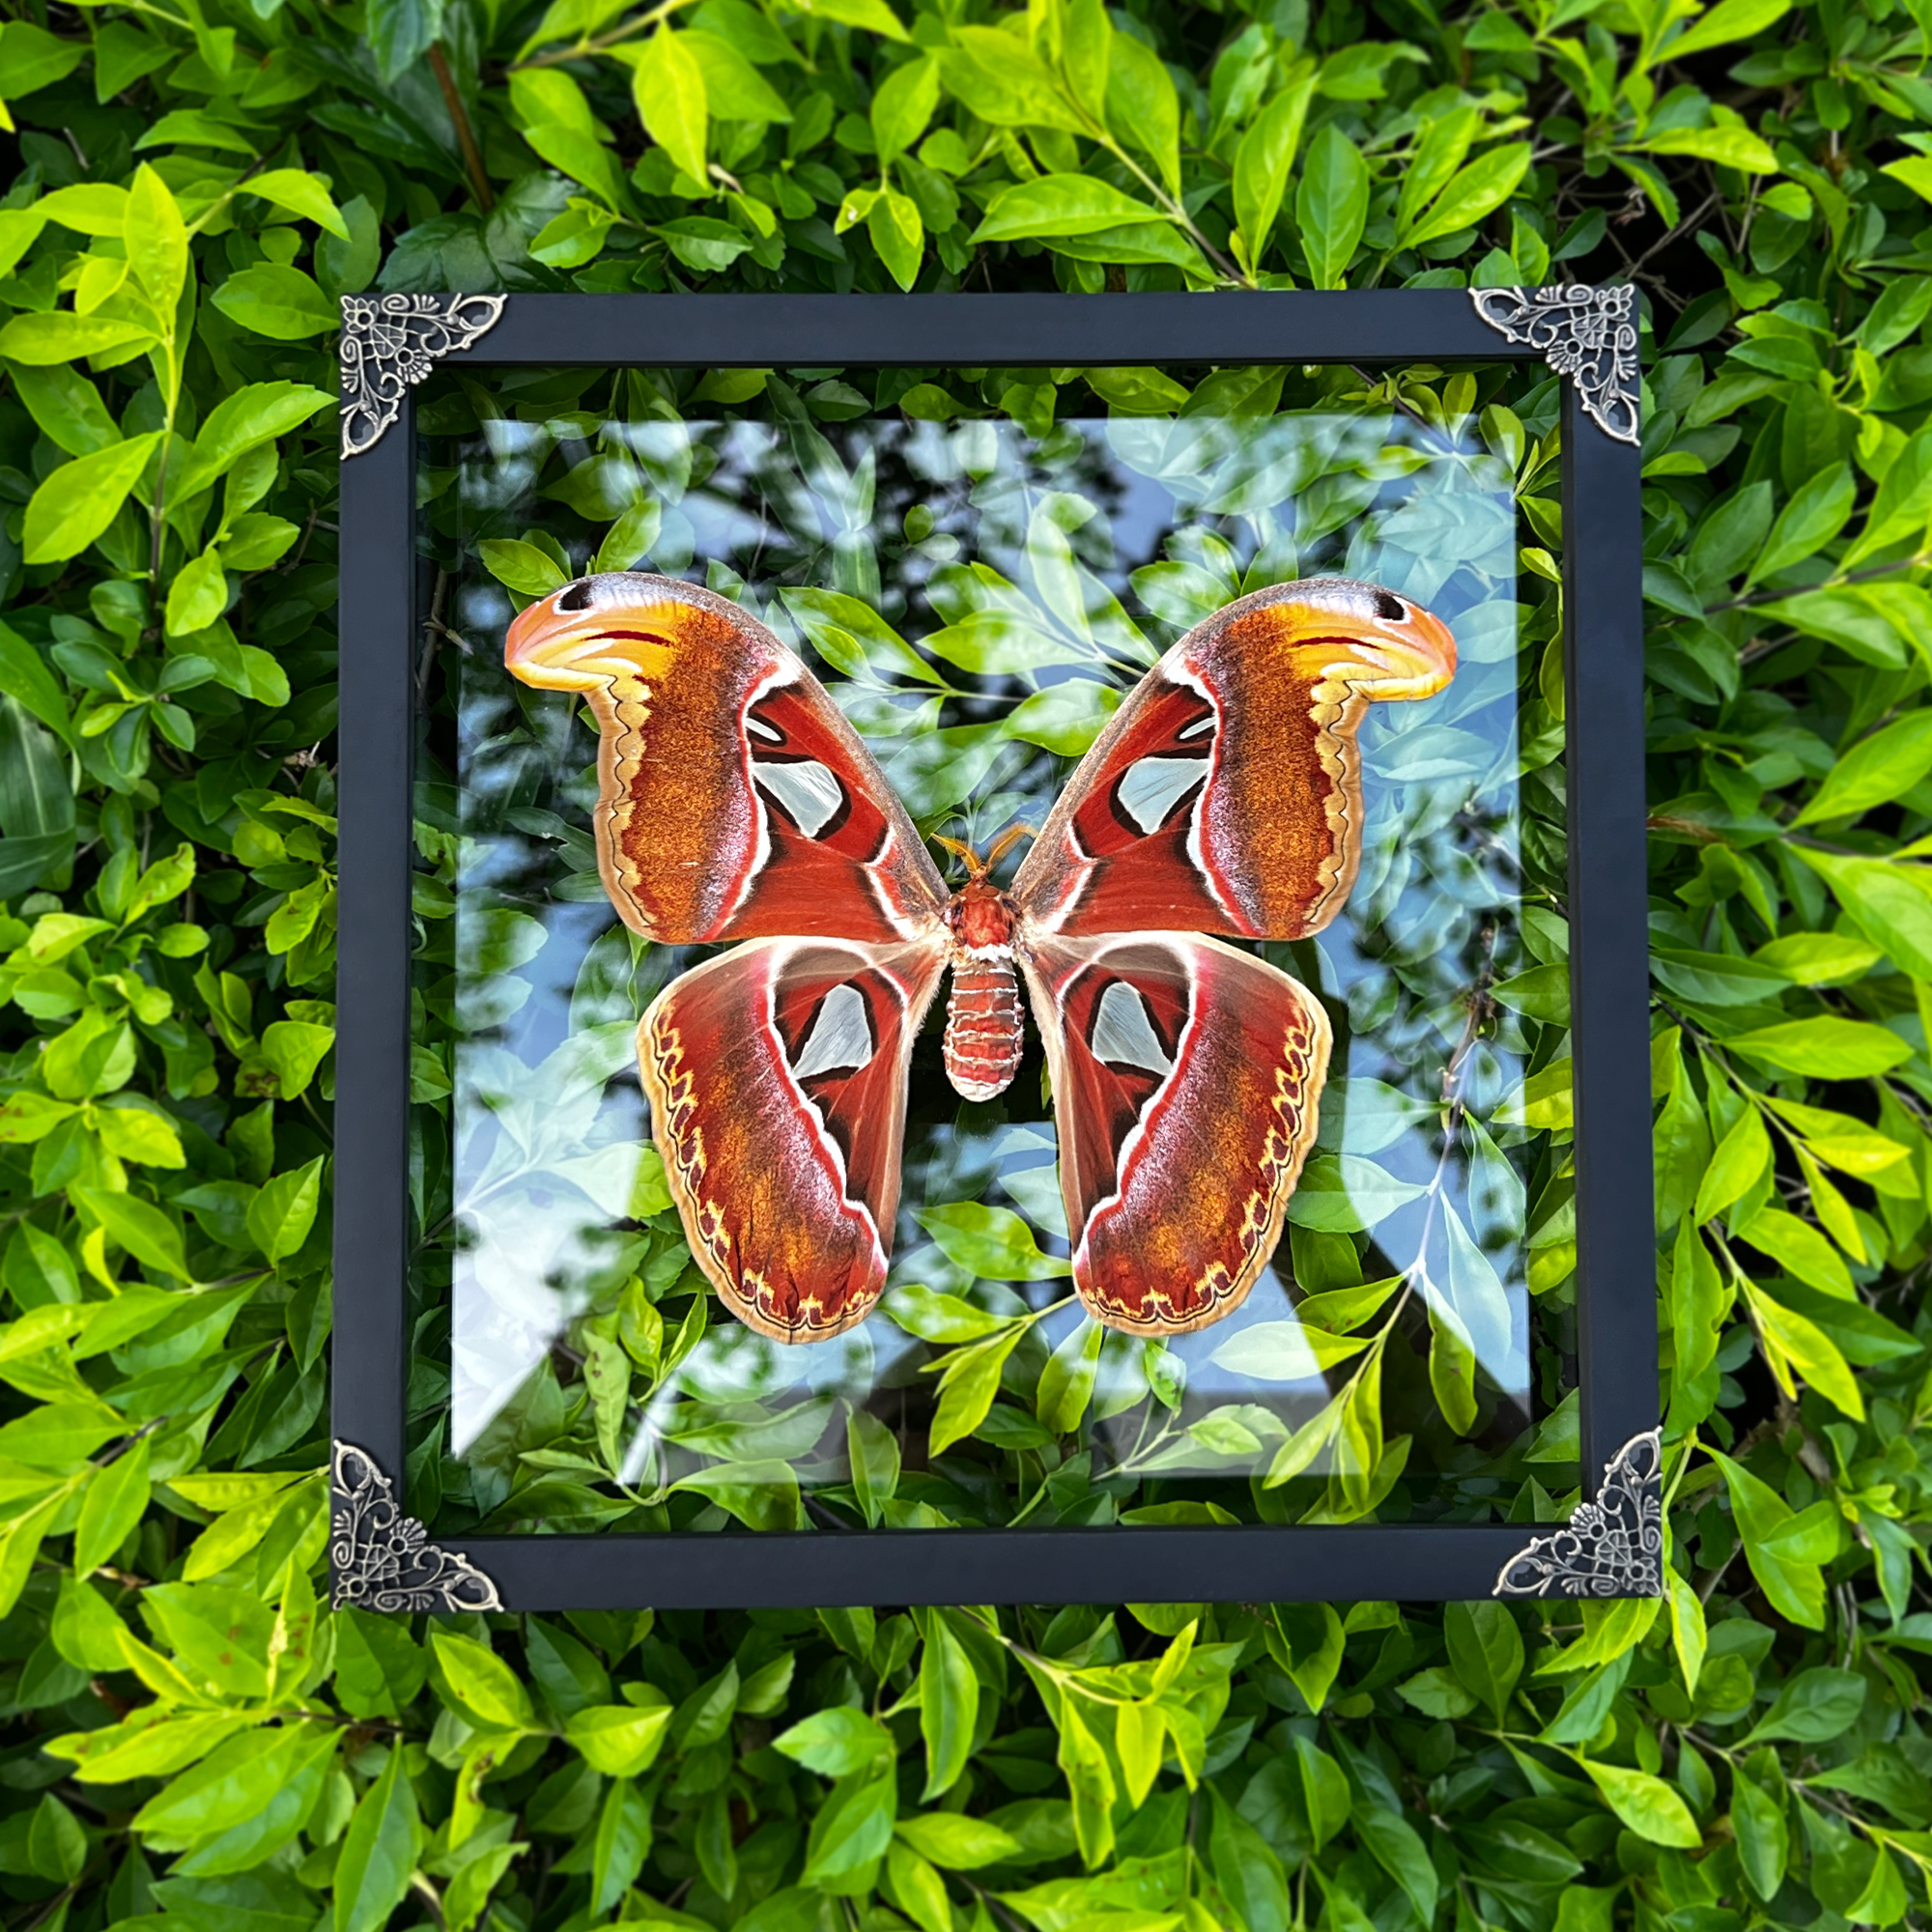 Real Atlas Moth Butterfly Framed Dead Insect Gothic Vintage Victorian Wall Hanging Decor Home K26-35-KINH